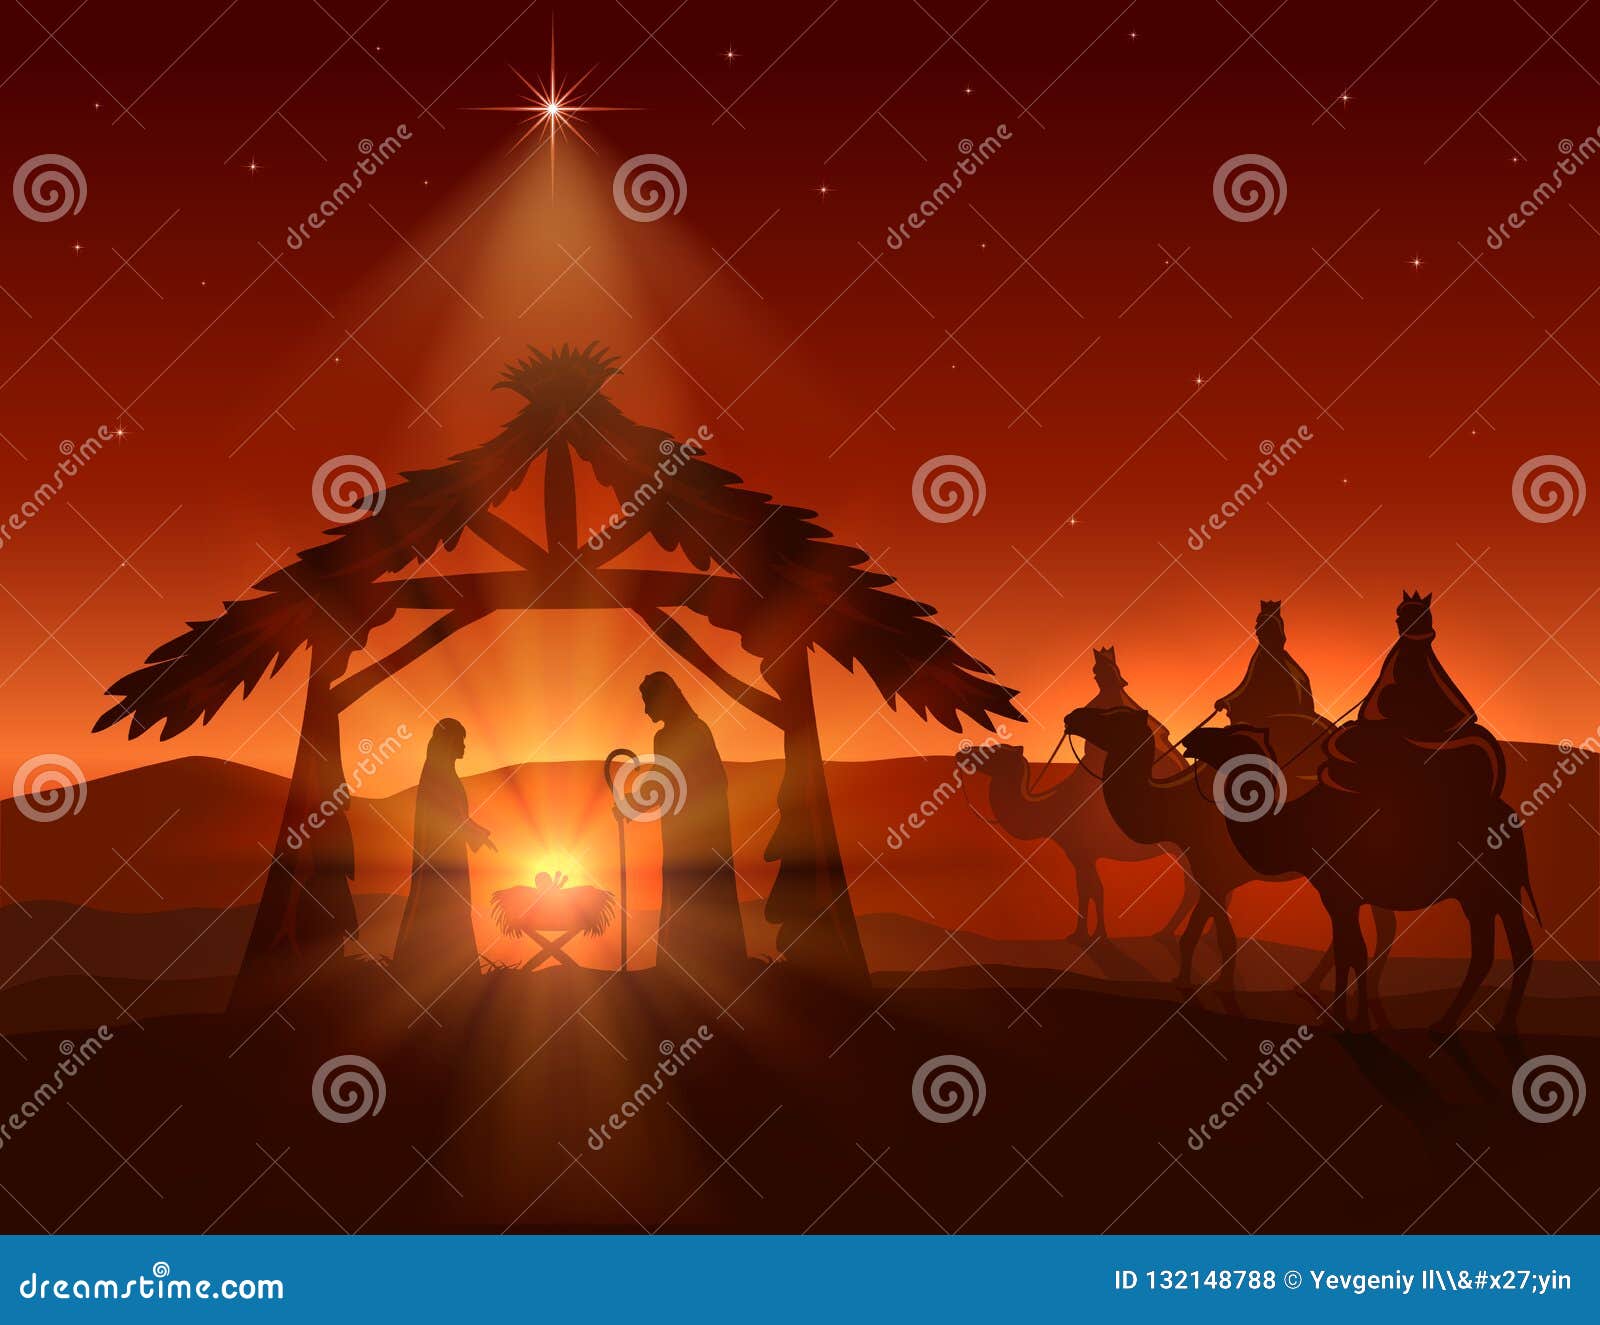 Christian Christmas with Wise Men and Jesus on Night Background Stock ...